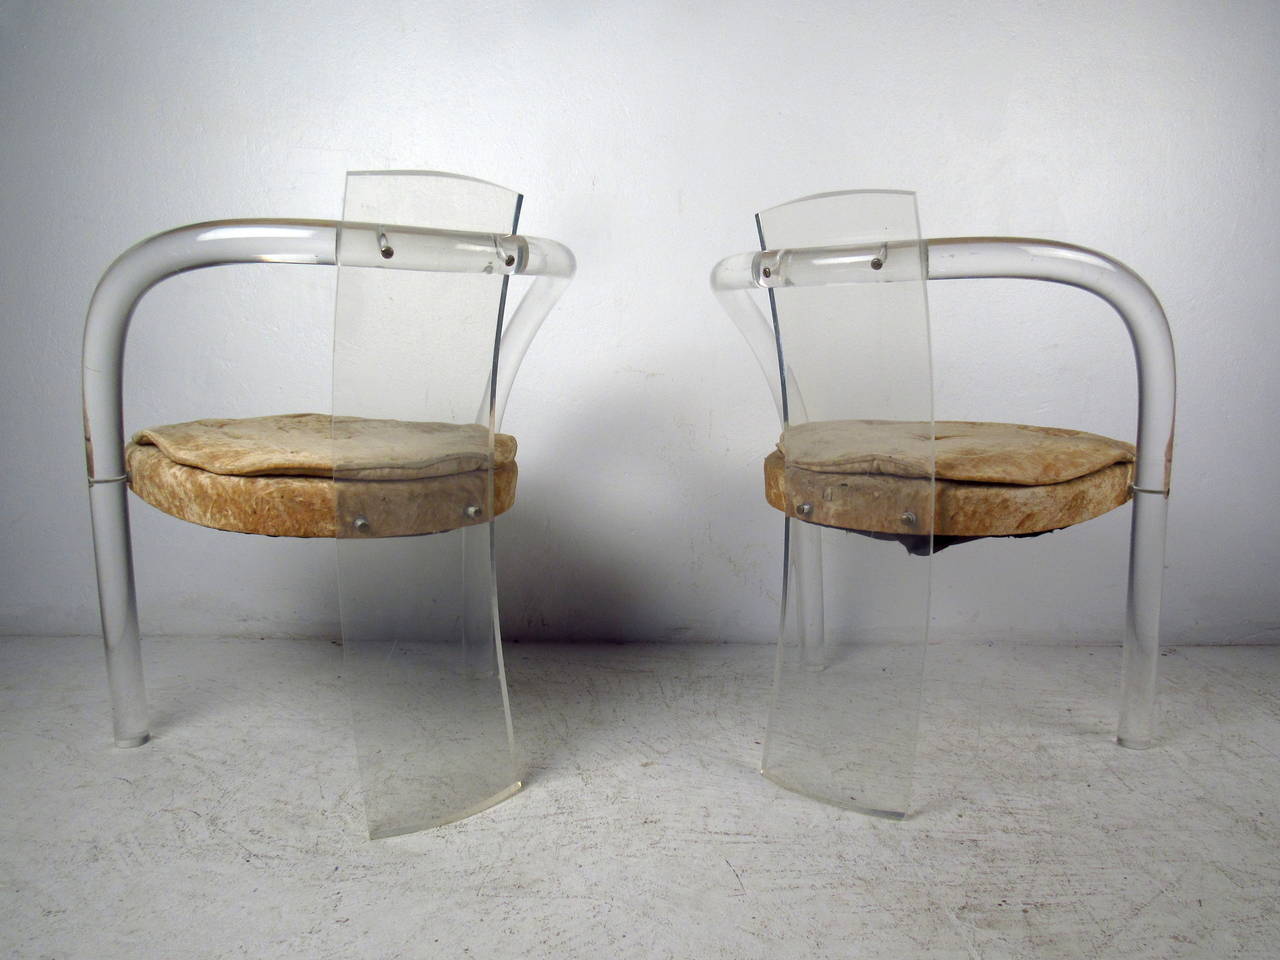 Pair of Mid-Century Modern Lucite Chairs with Upholstered Cushions In Fair Condition For Sale In Brooklyn, NY